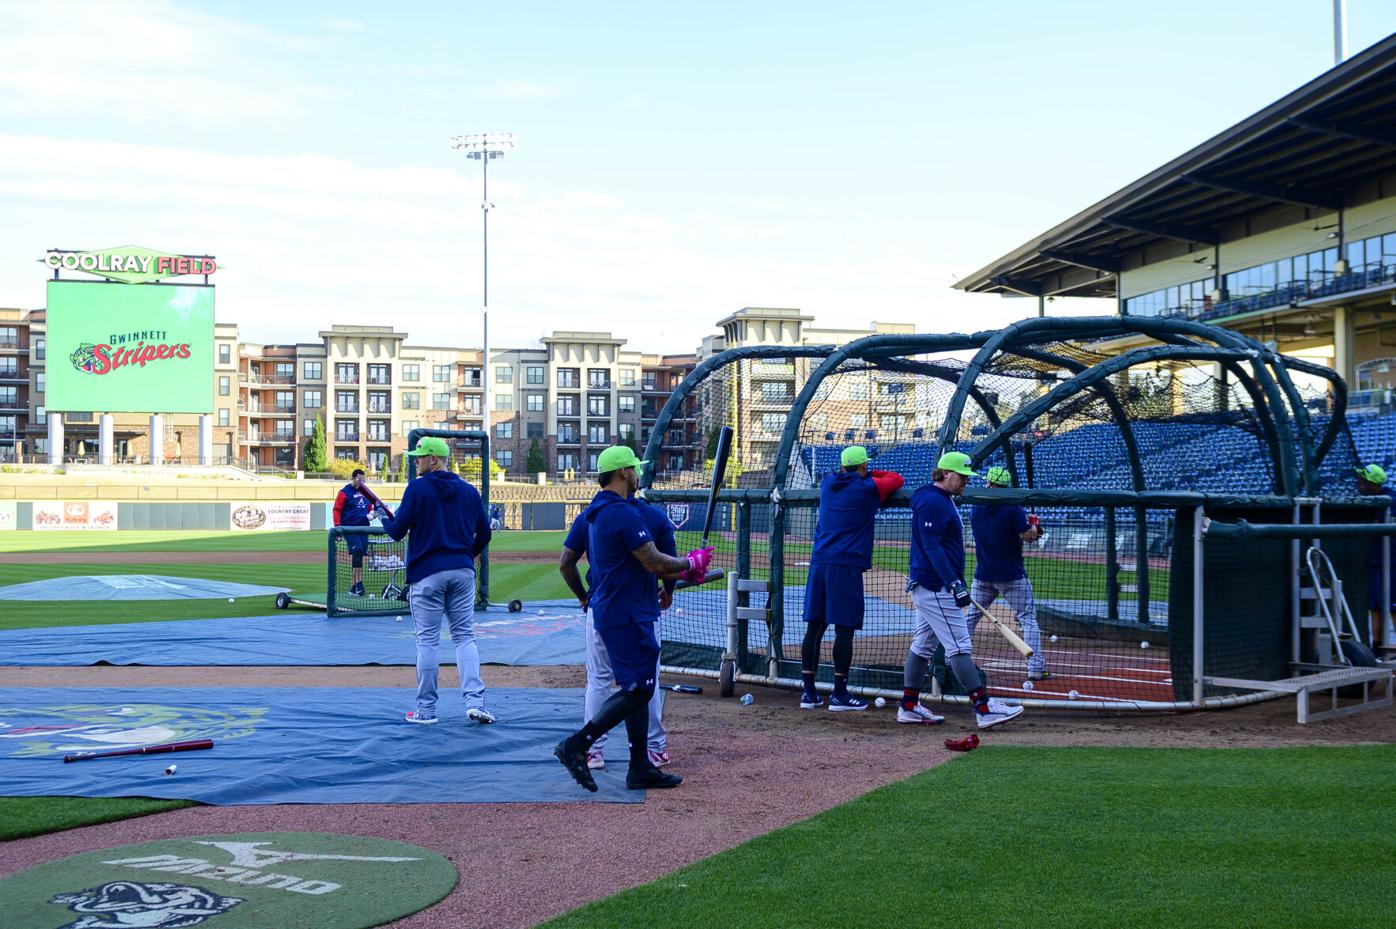 What's new at Coolray Field for the 2022 Gwinnett Stripers